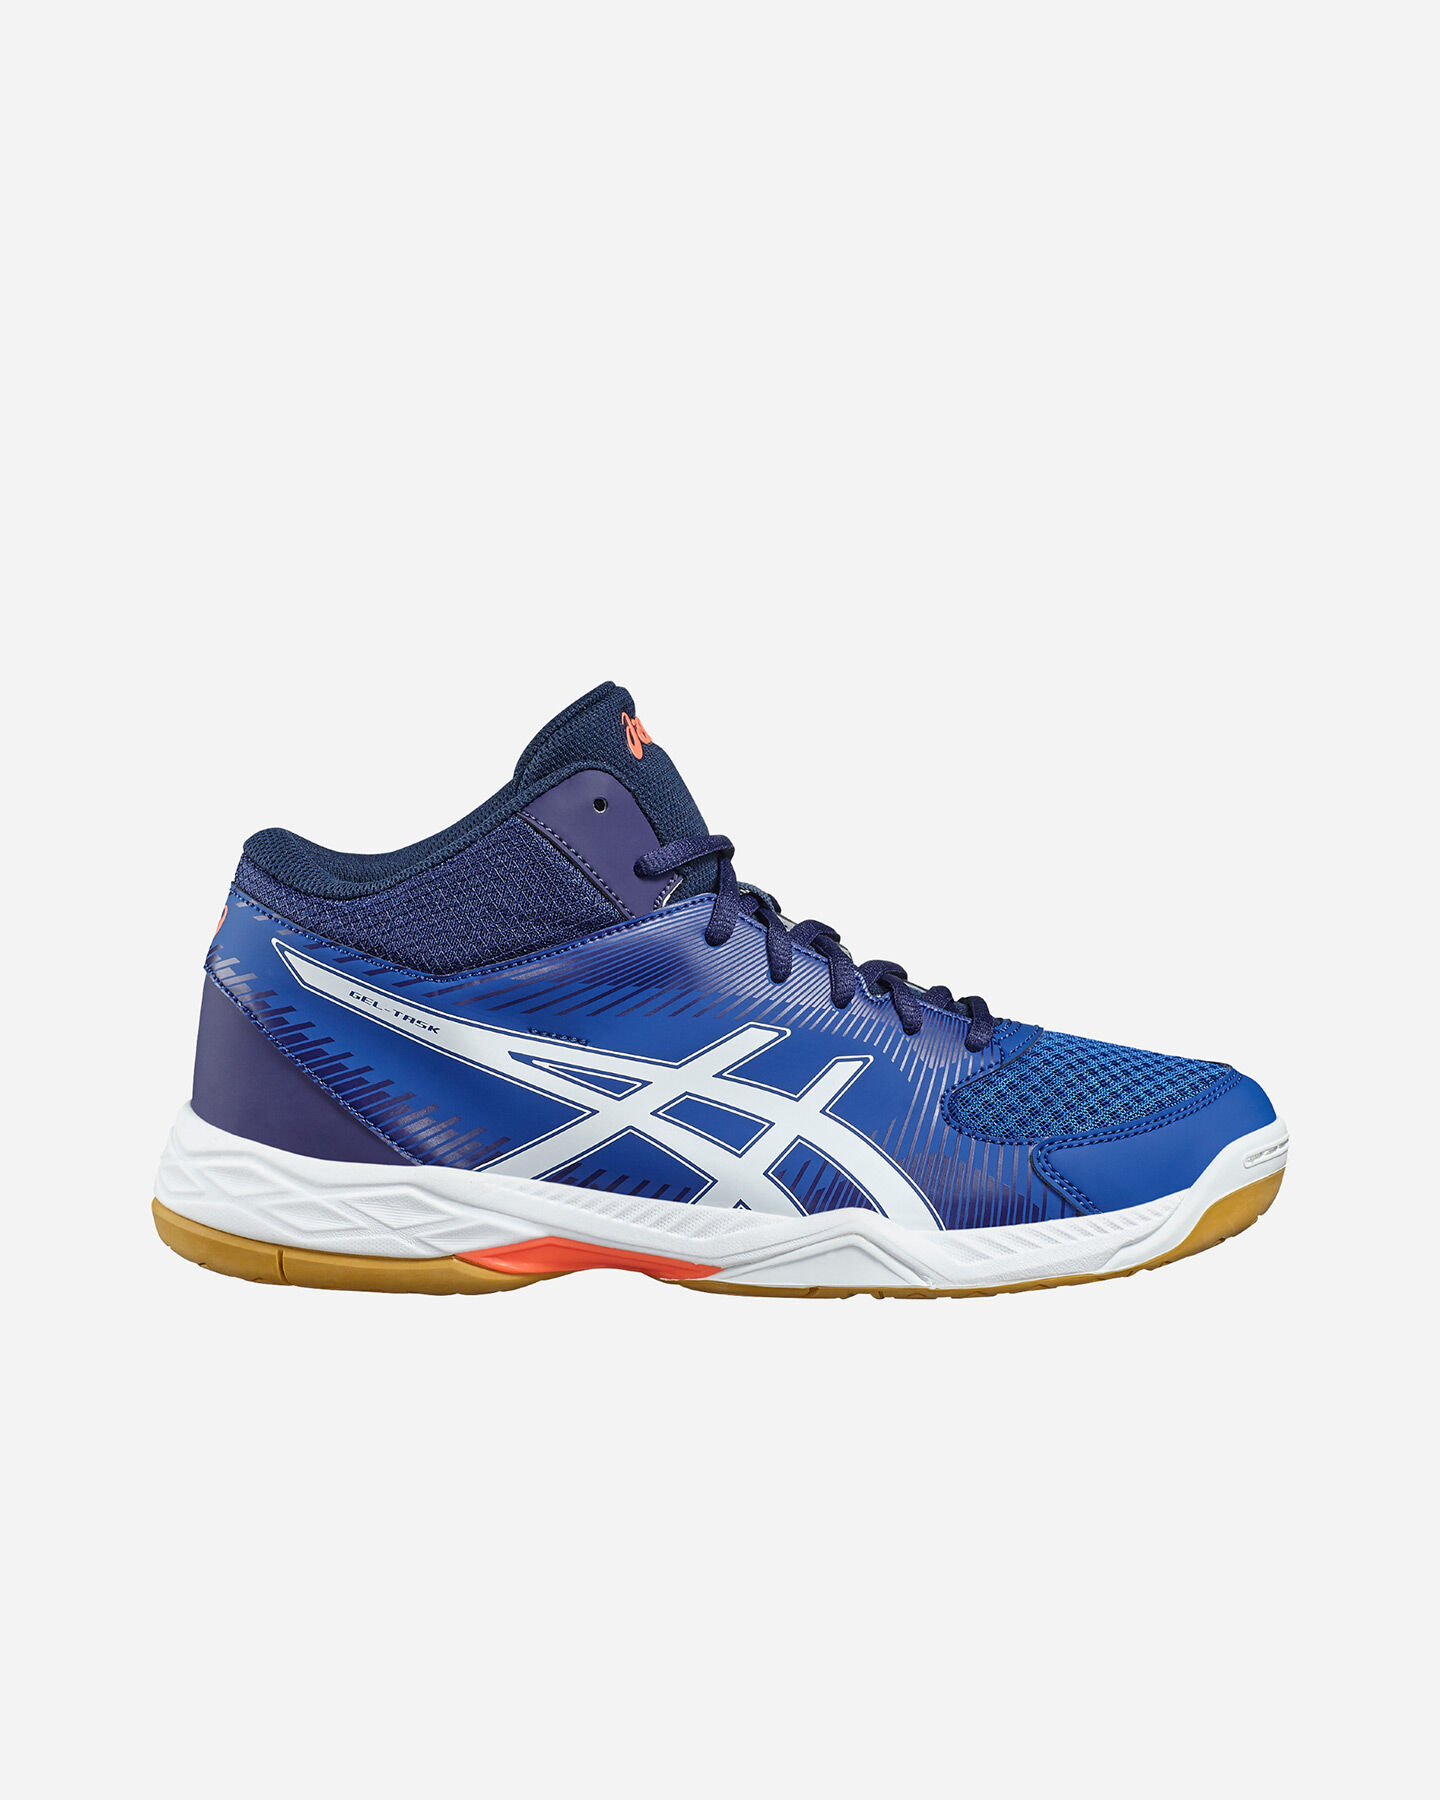 sneakers donna asics